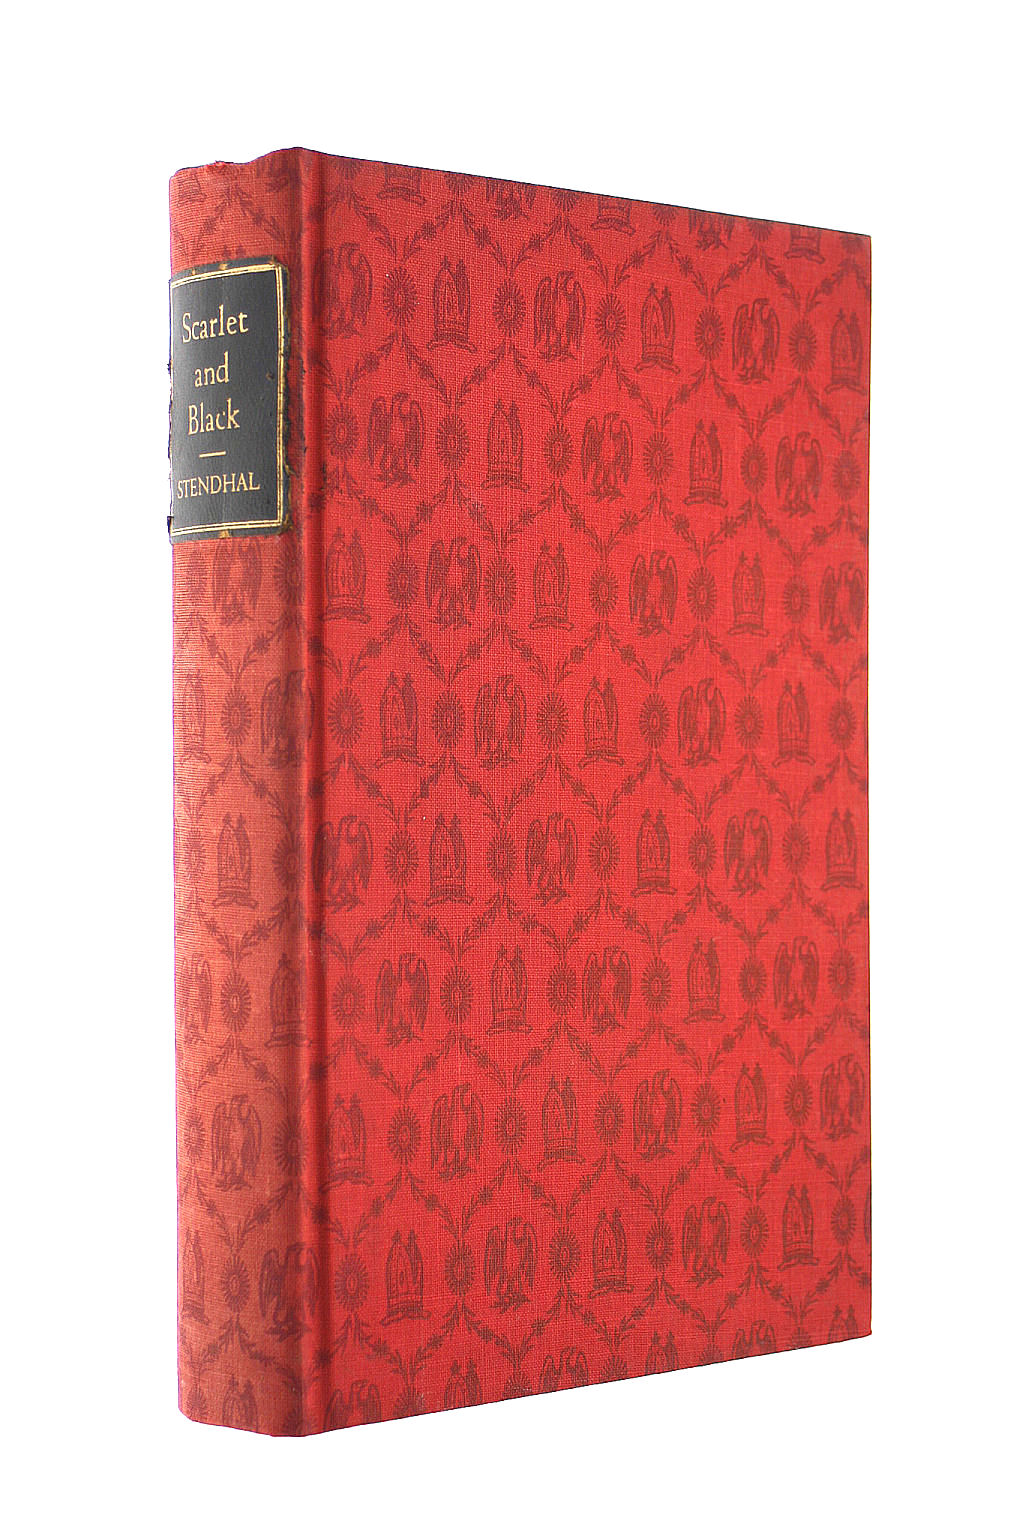 STENDHAL BEYLE, MARIE-HENRI; MARTIN, FRANK [ILLUSTRATOR] - Scarlet and black: A chronicle of the nineteenth century